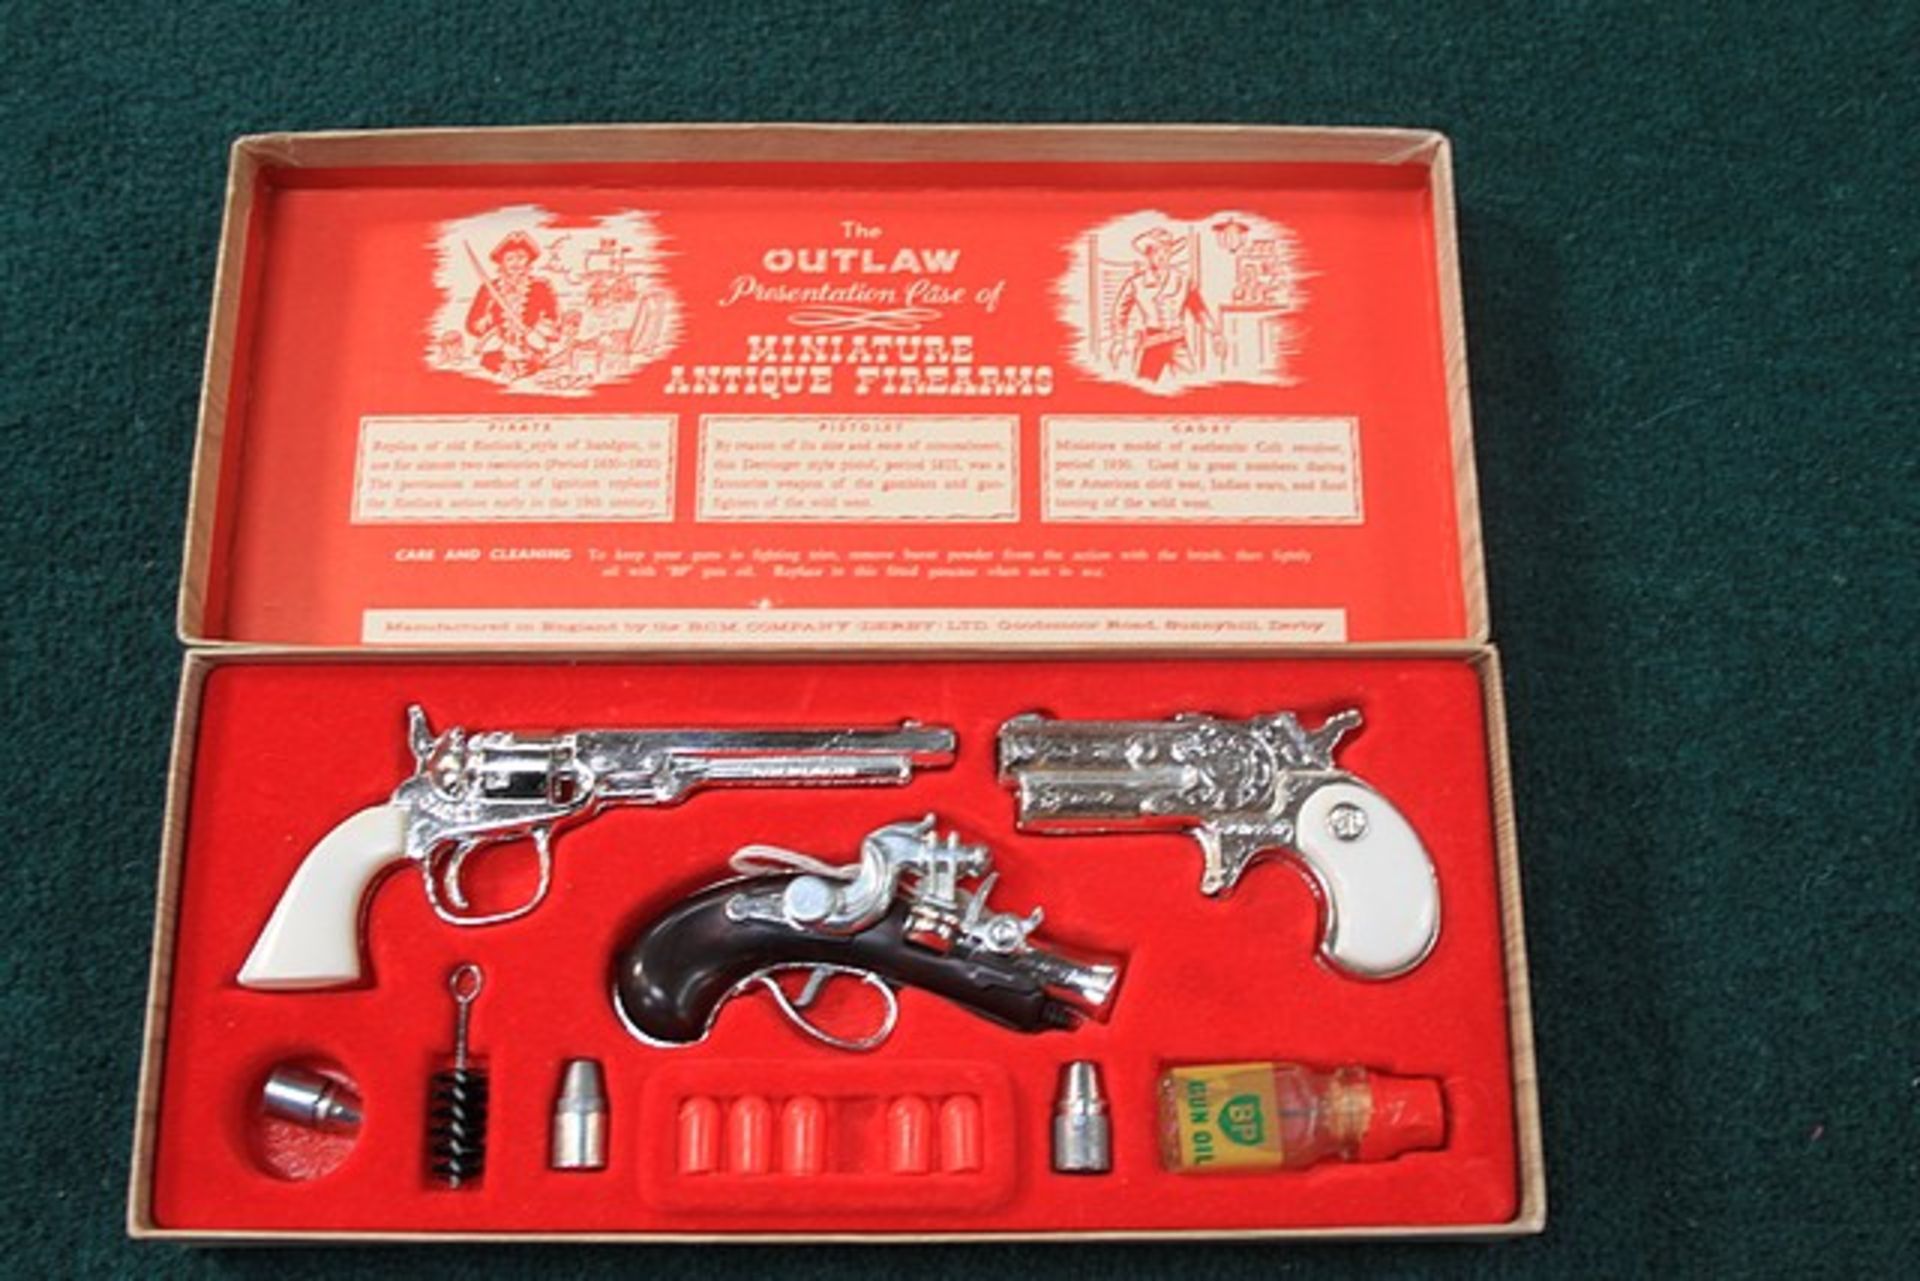 BCM The Outlaw Presentation Case Of Miniature Antique Firearms Composing Of A Pirate Gun Pistolet